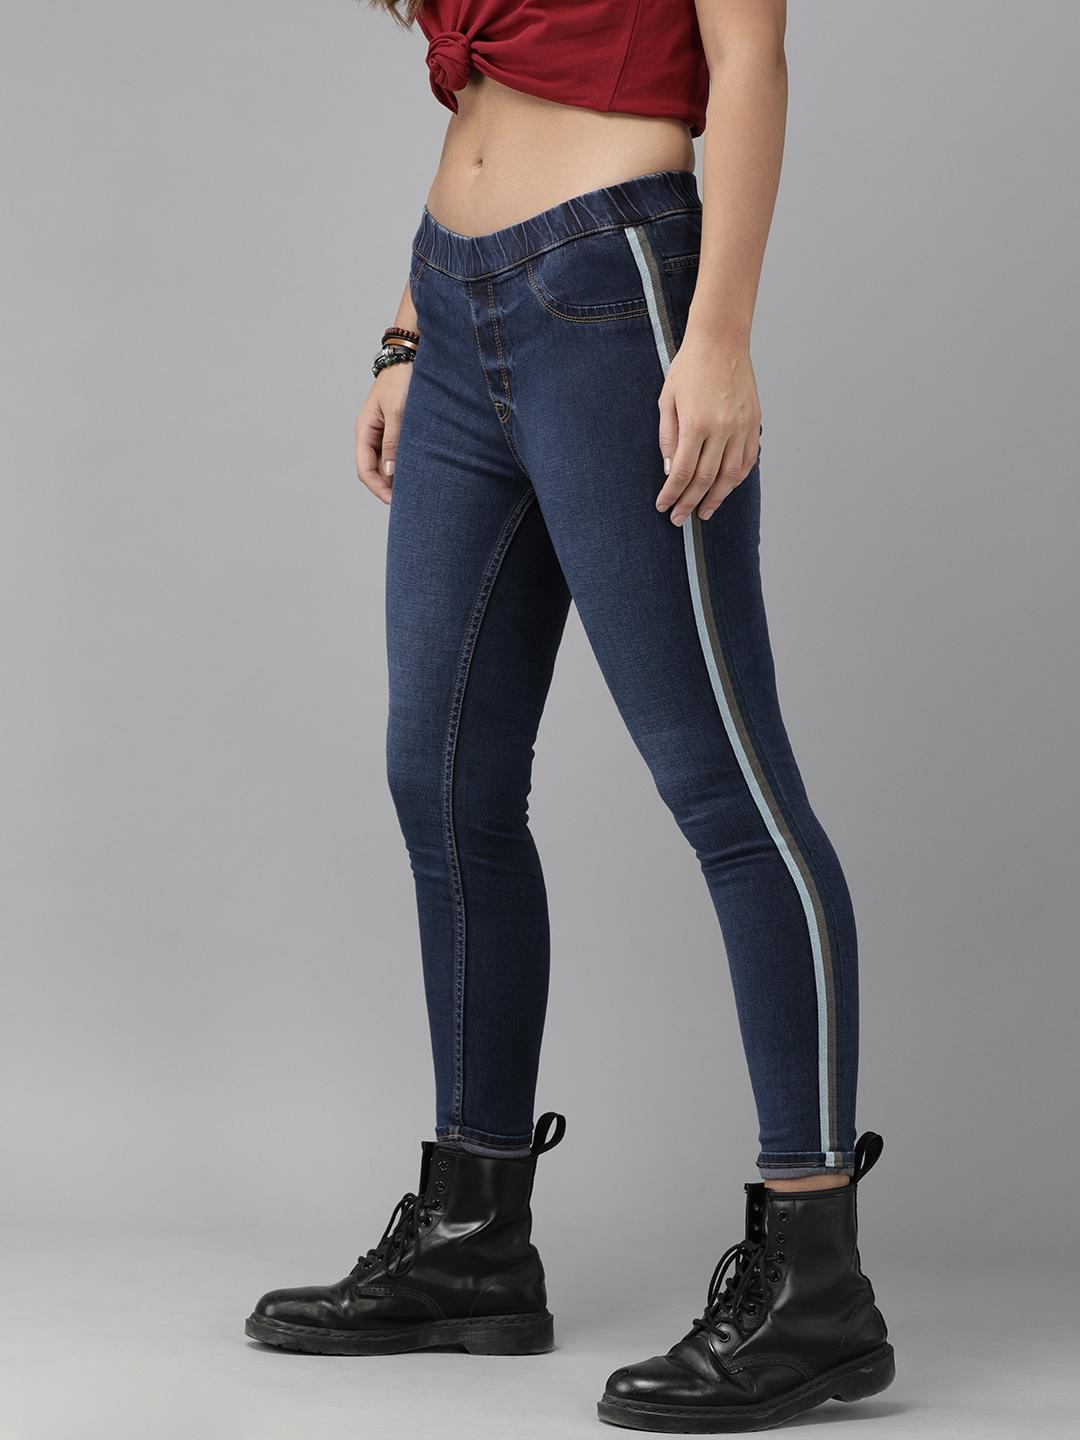 the roadster lifestyle co women blue washed mid-rise side striped denim jeggings